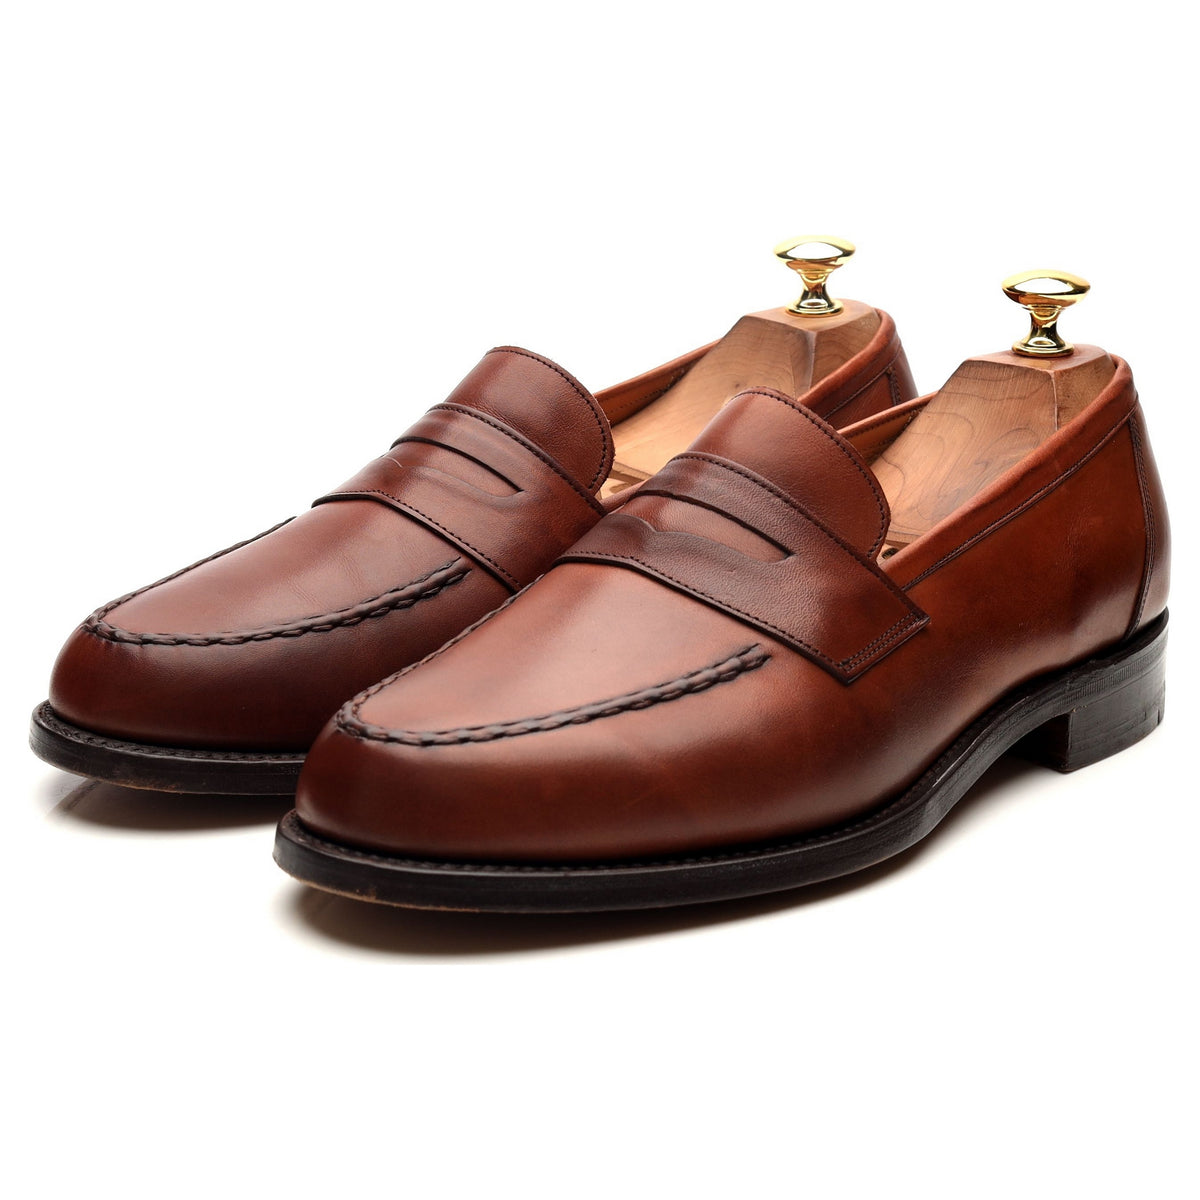 Tan Brown Leather Loafers UK 9 F